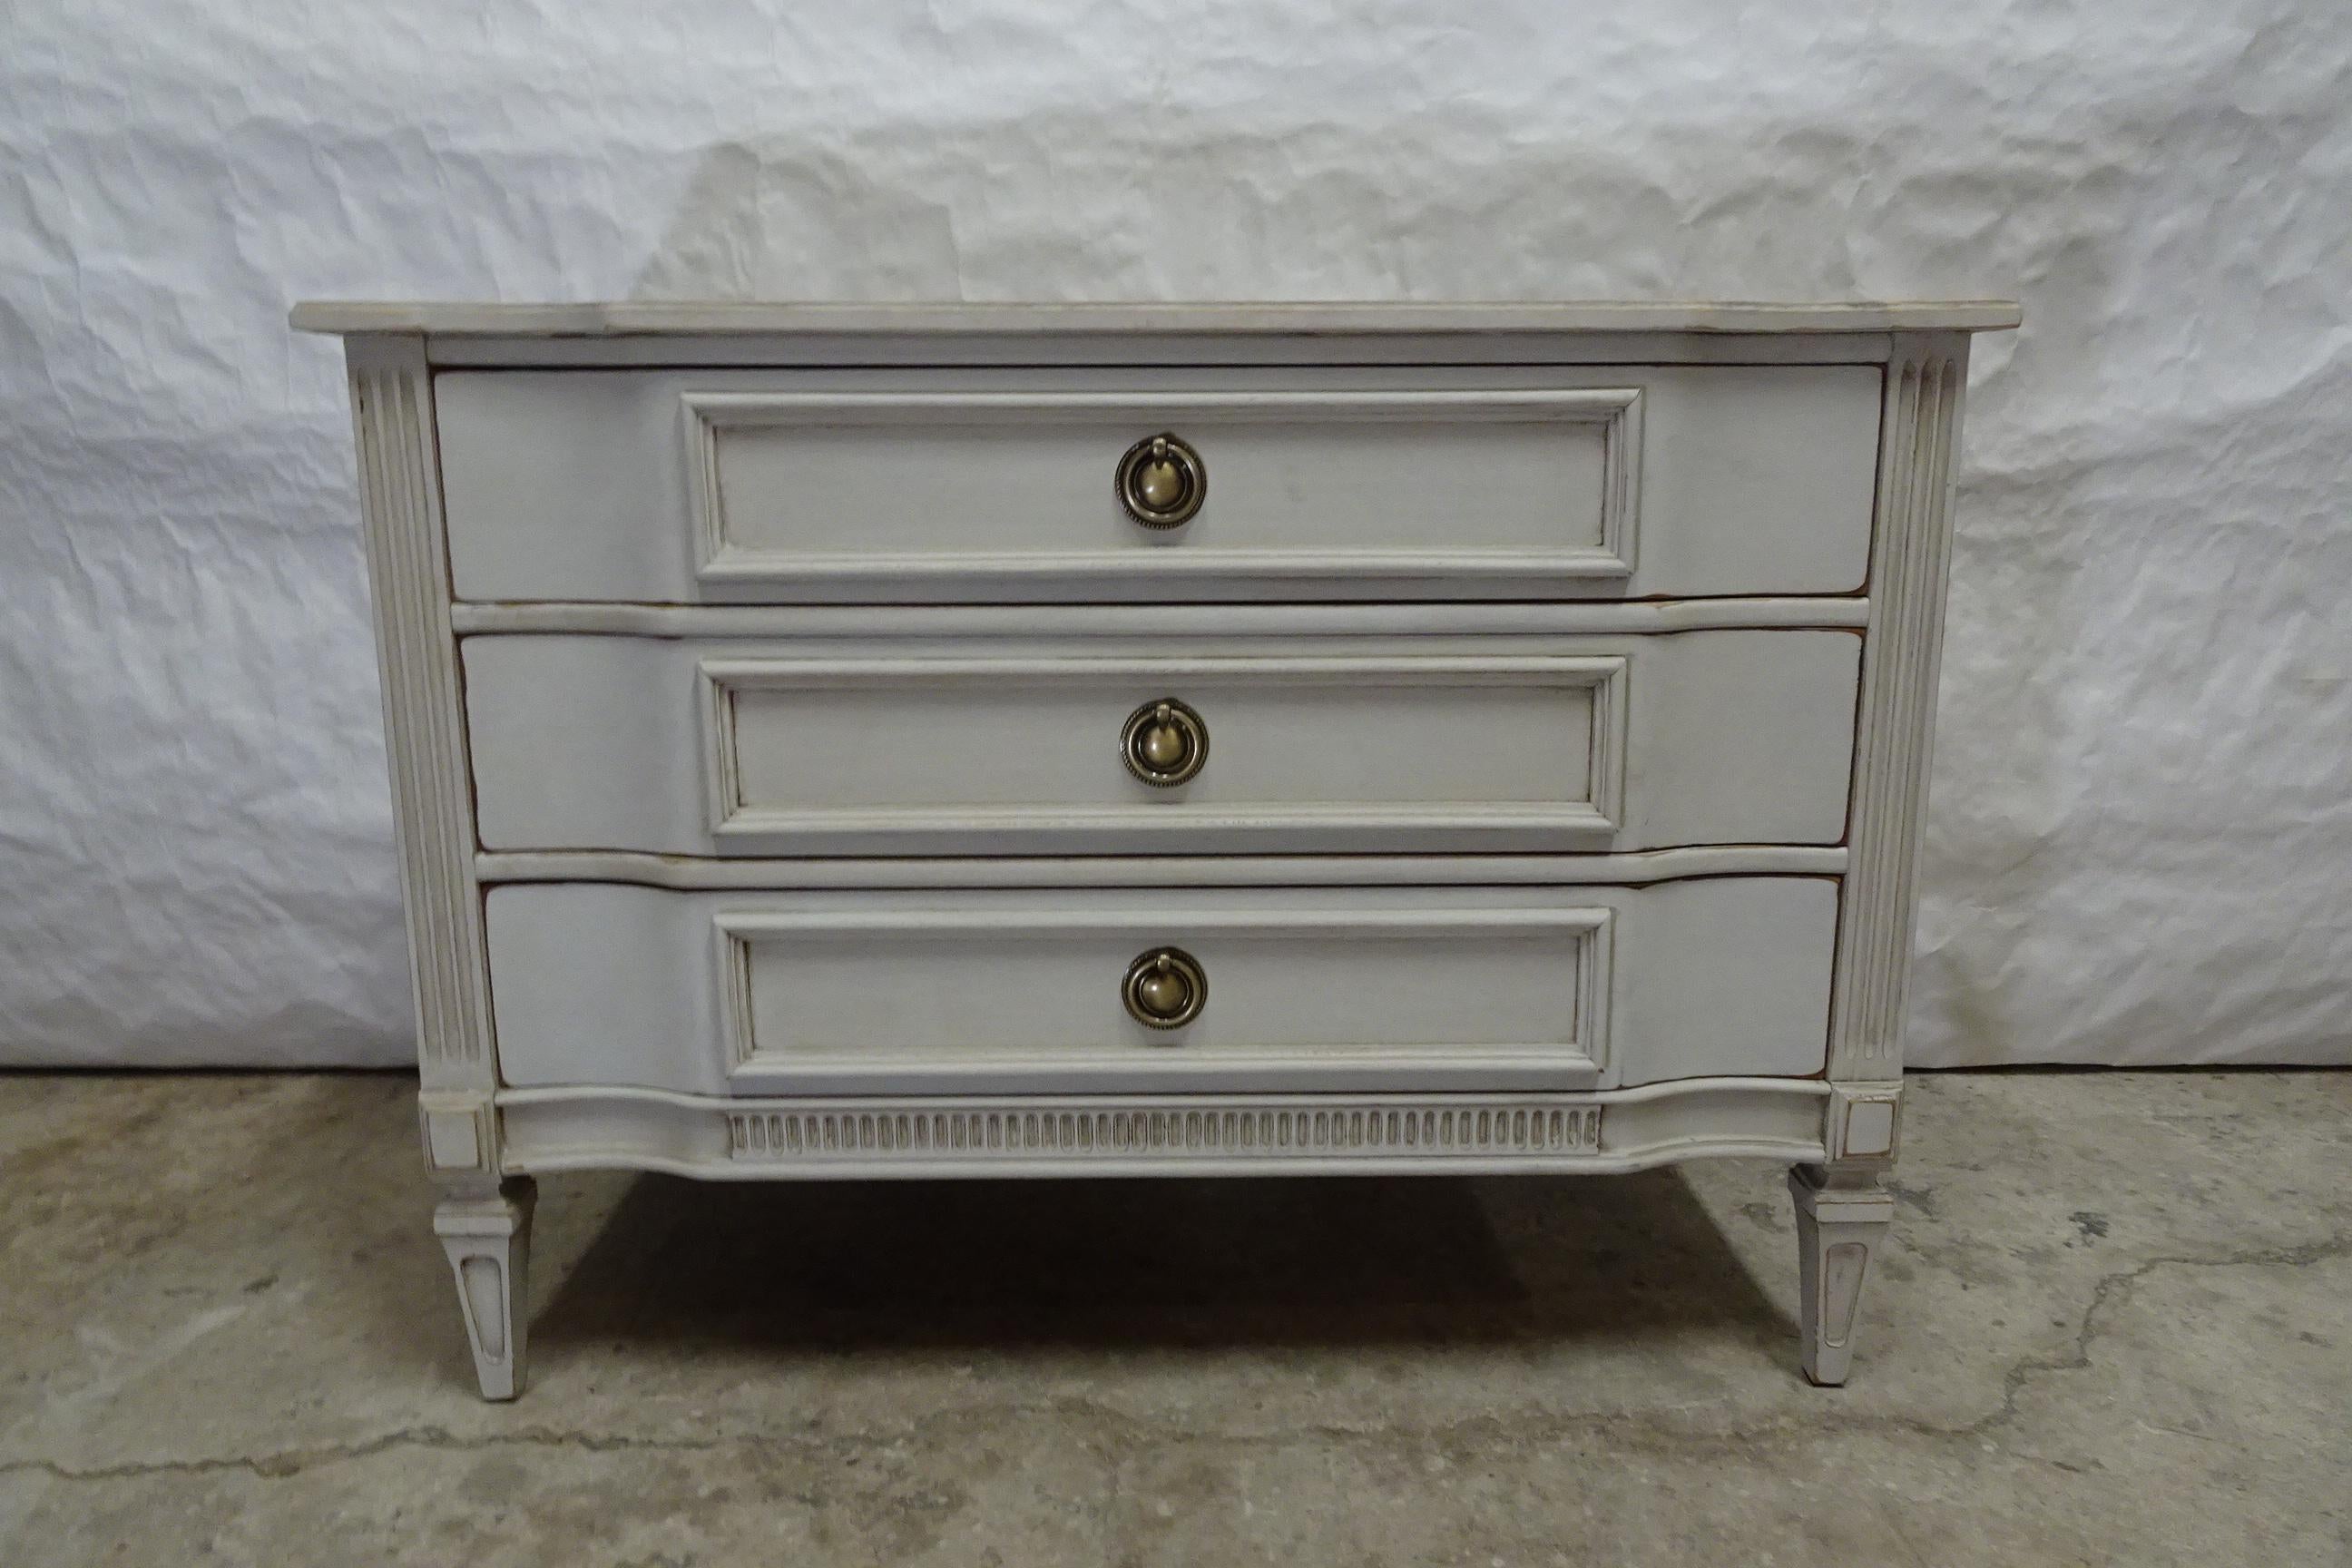 This is a Gustavian Style Unique 3 Drawer Chest of Drawers . Its been restored and repainted with Milk Paints 